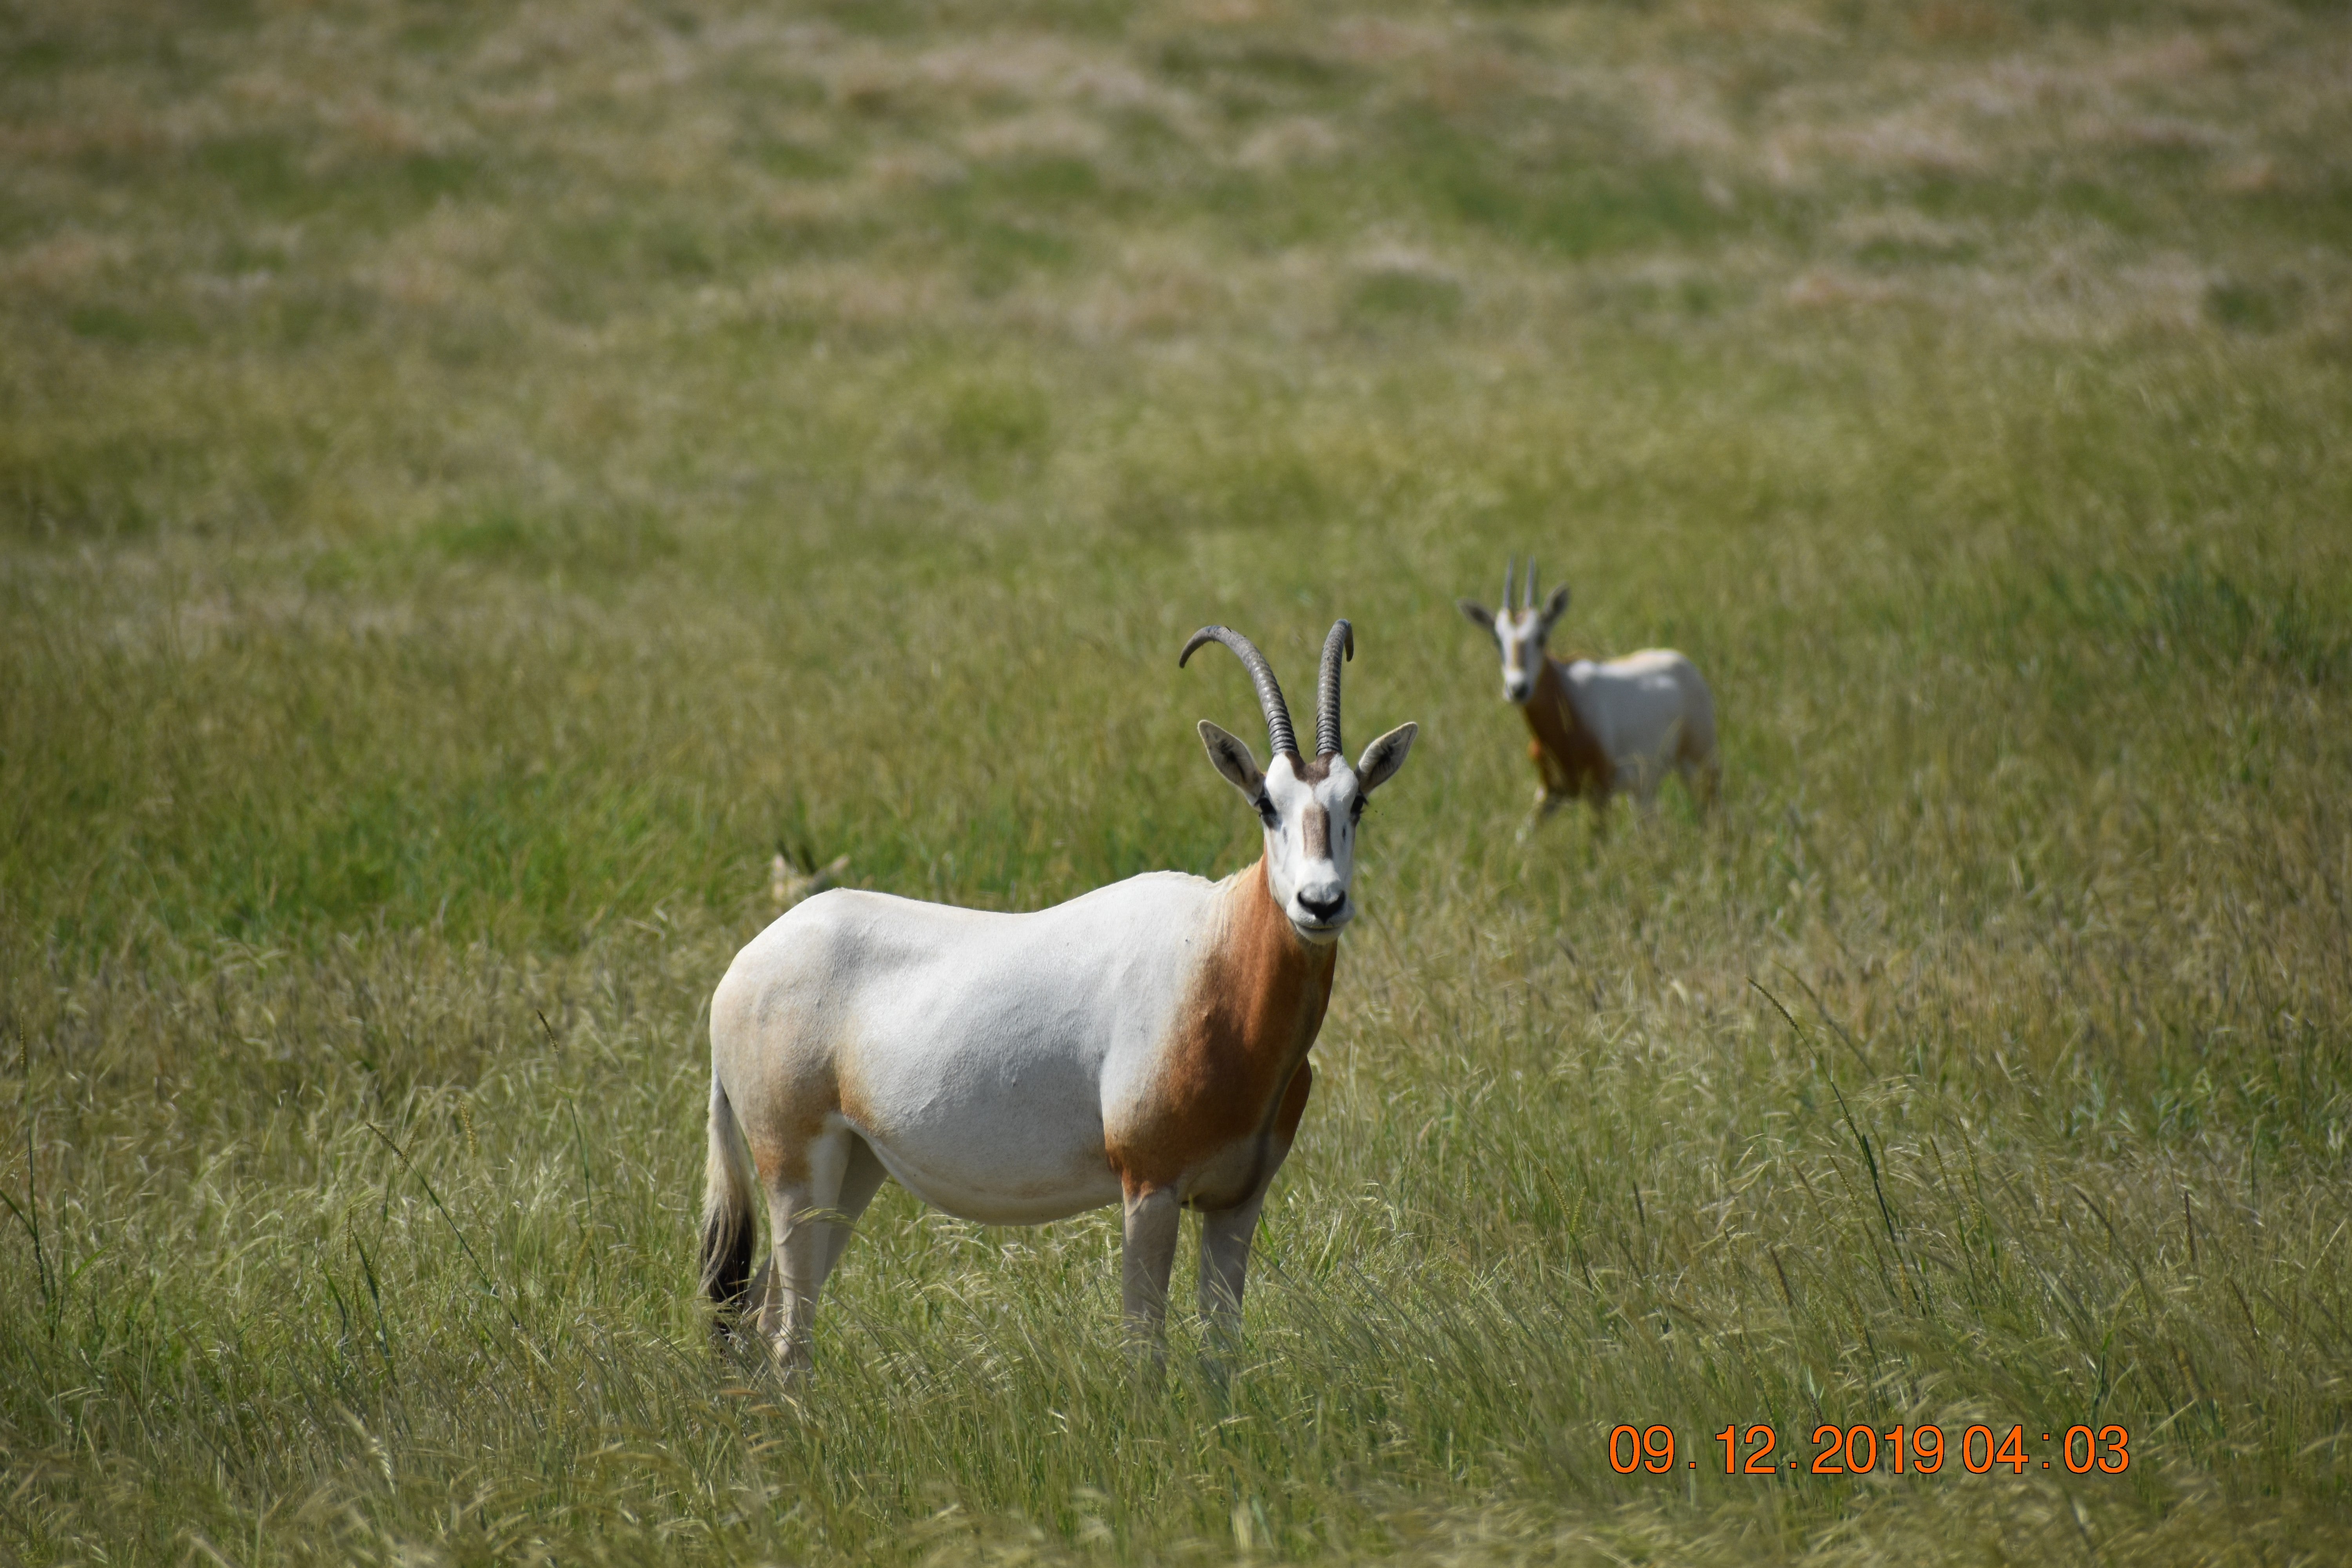 A photo of a scimitar-horned oryx in a green pasture. A second oryx can be seen in the background.